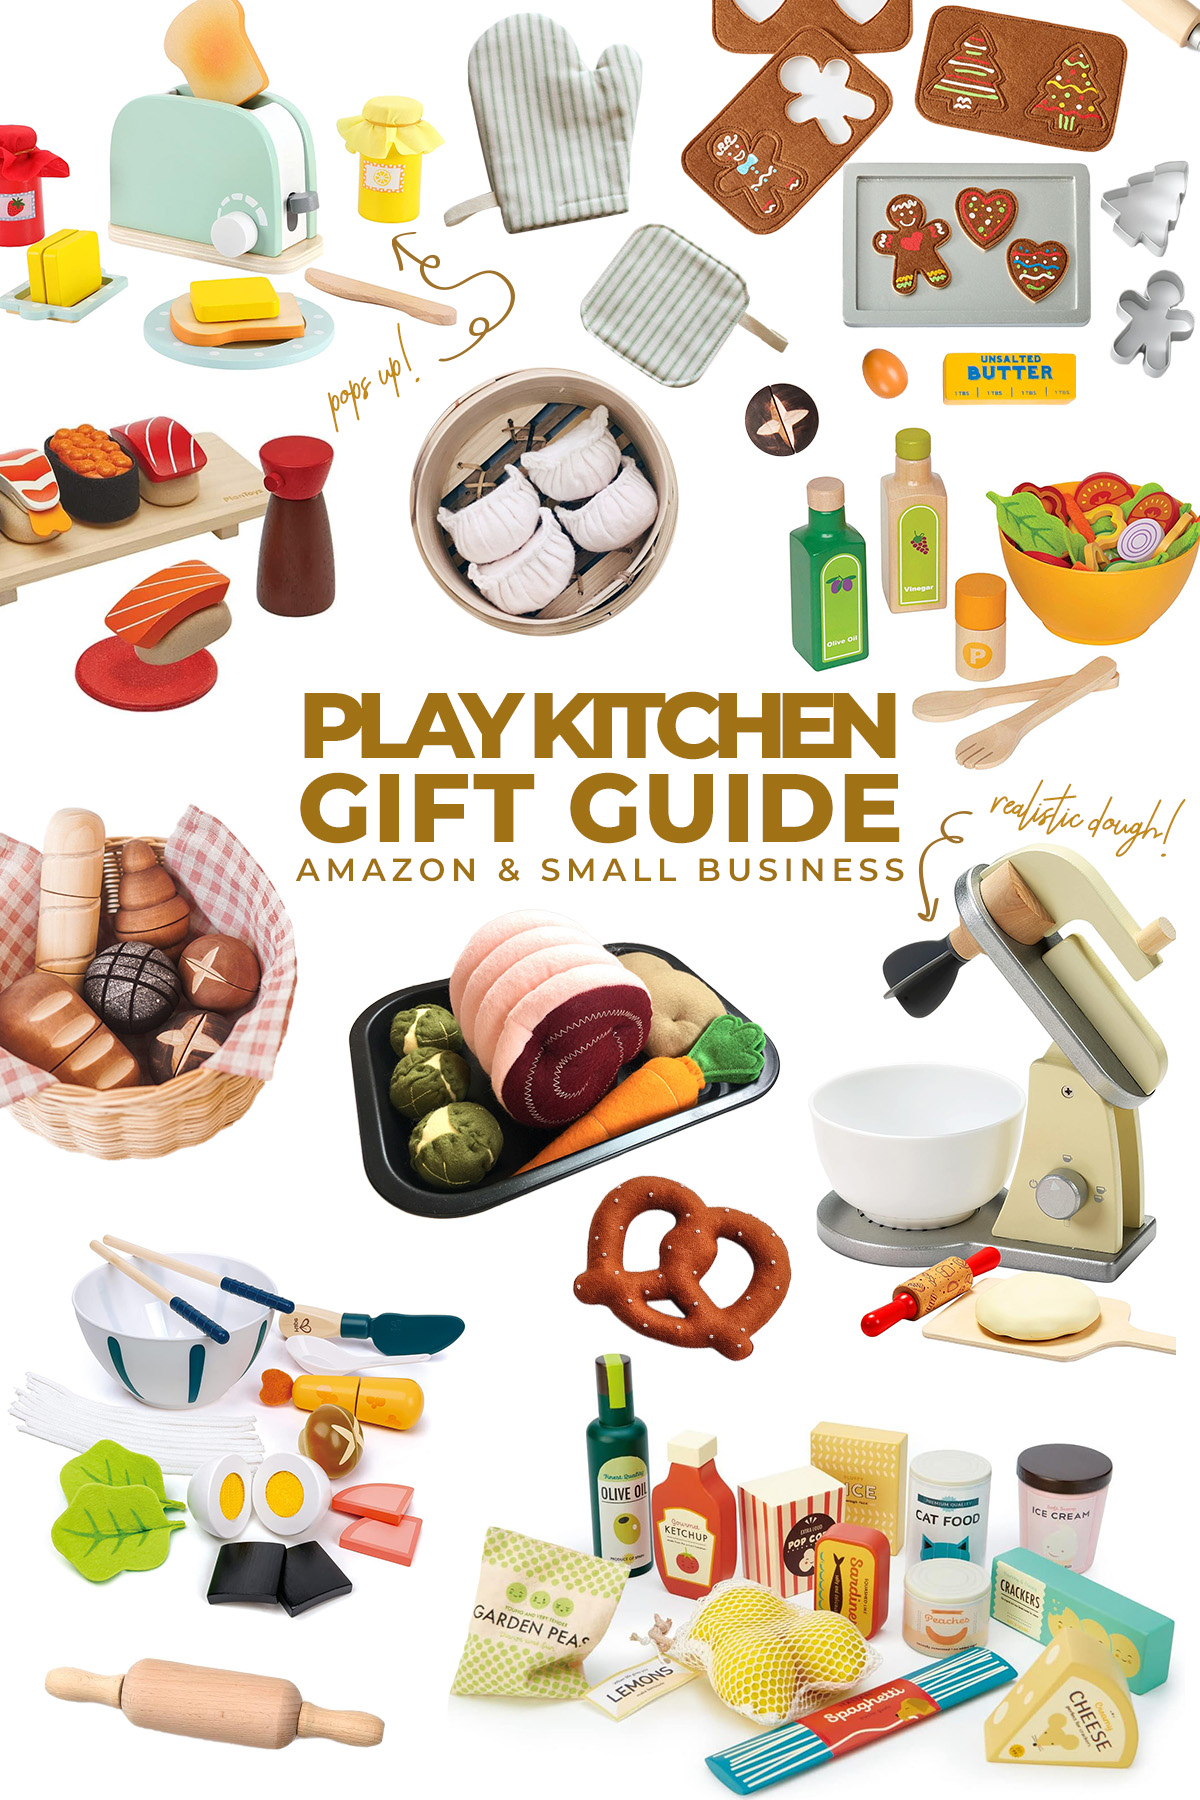 Play Kitchen Gift Guide Amazon & Small Business